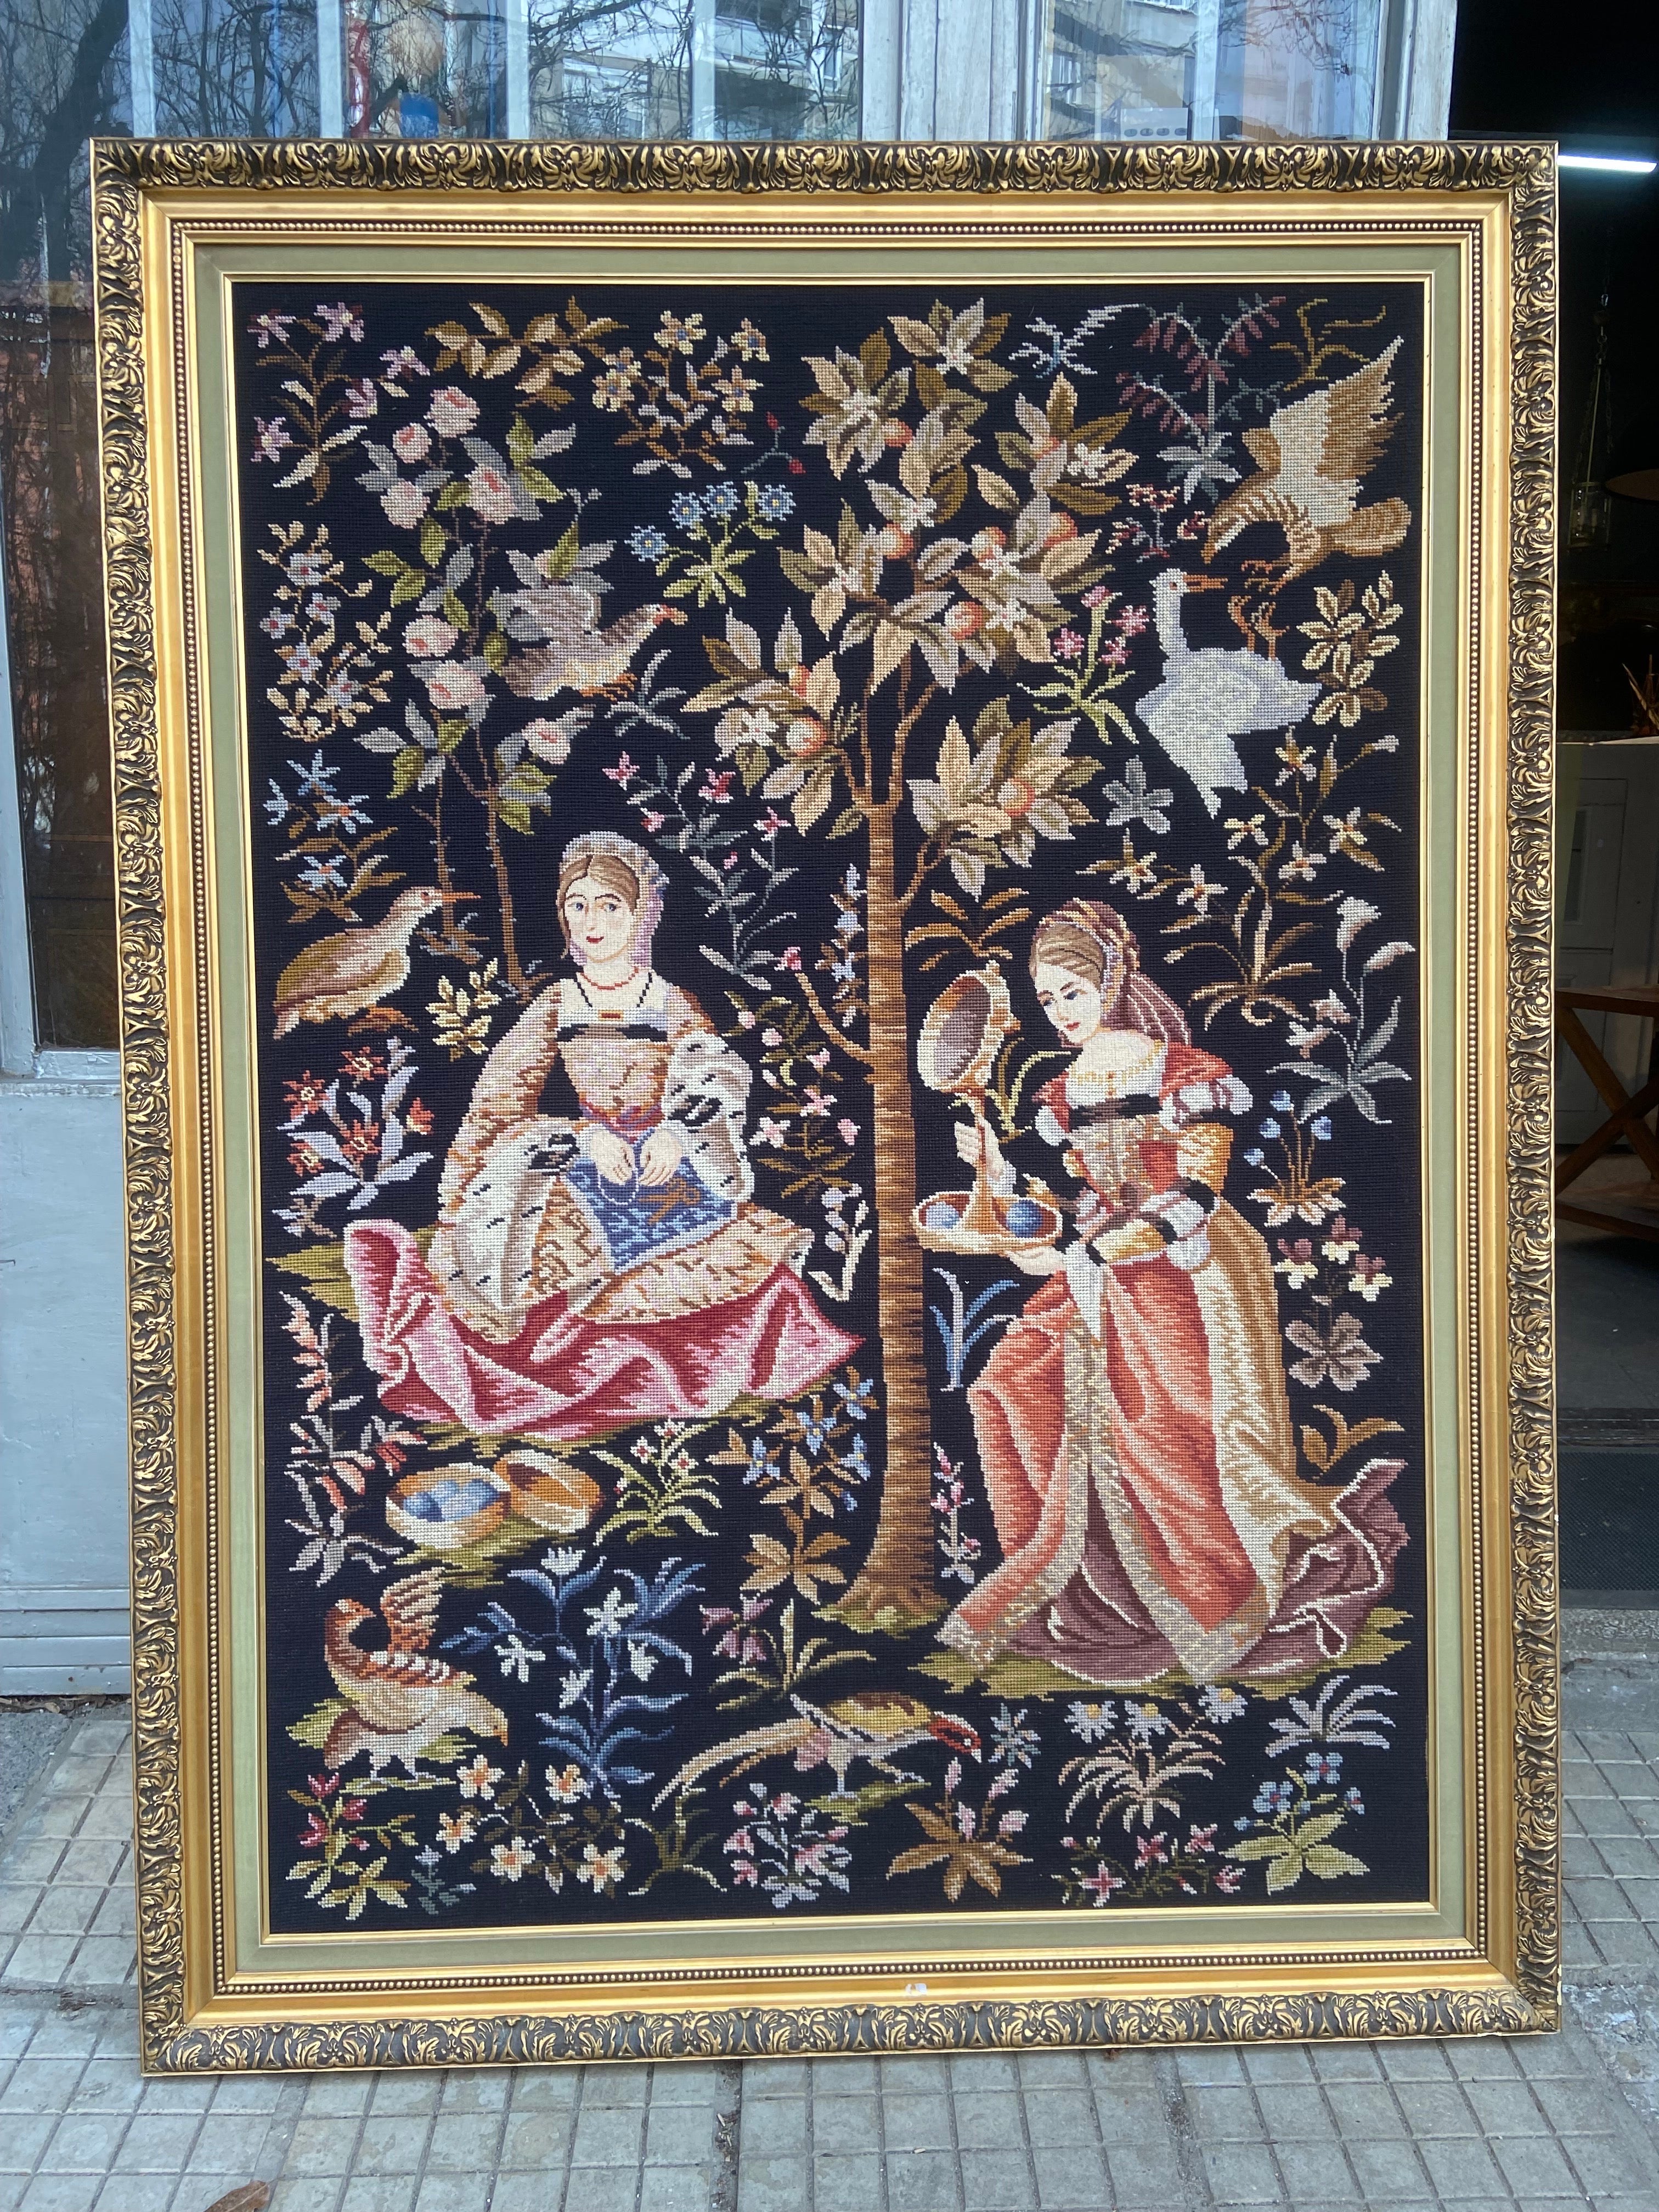 French wool machine made tapestry in a frame representing a medieval scene with two ladies surrounded with birds on a background of beautiful trees and blossom flowers. Very good authentic condition with no restorations made.
circa 1930
Measures: